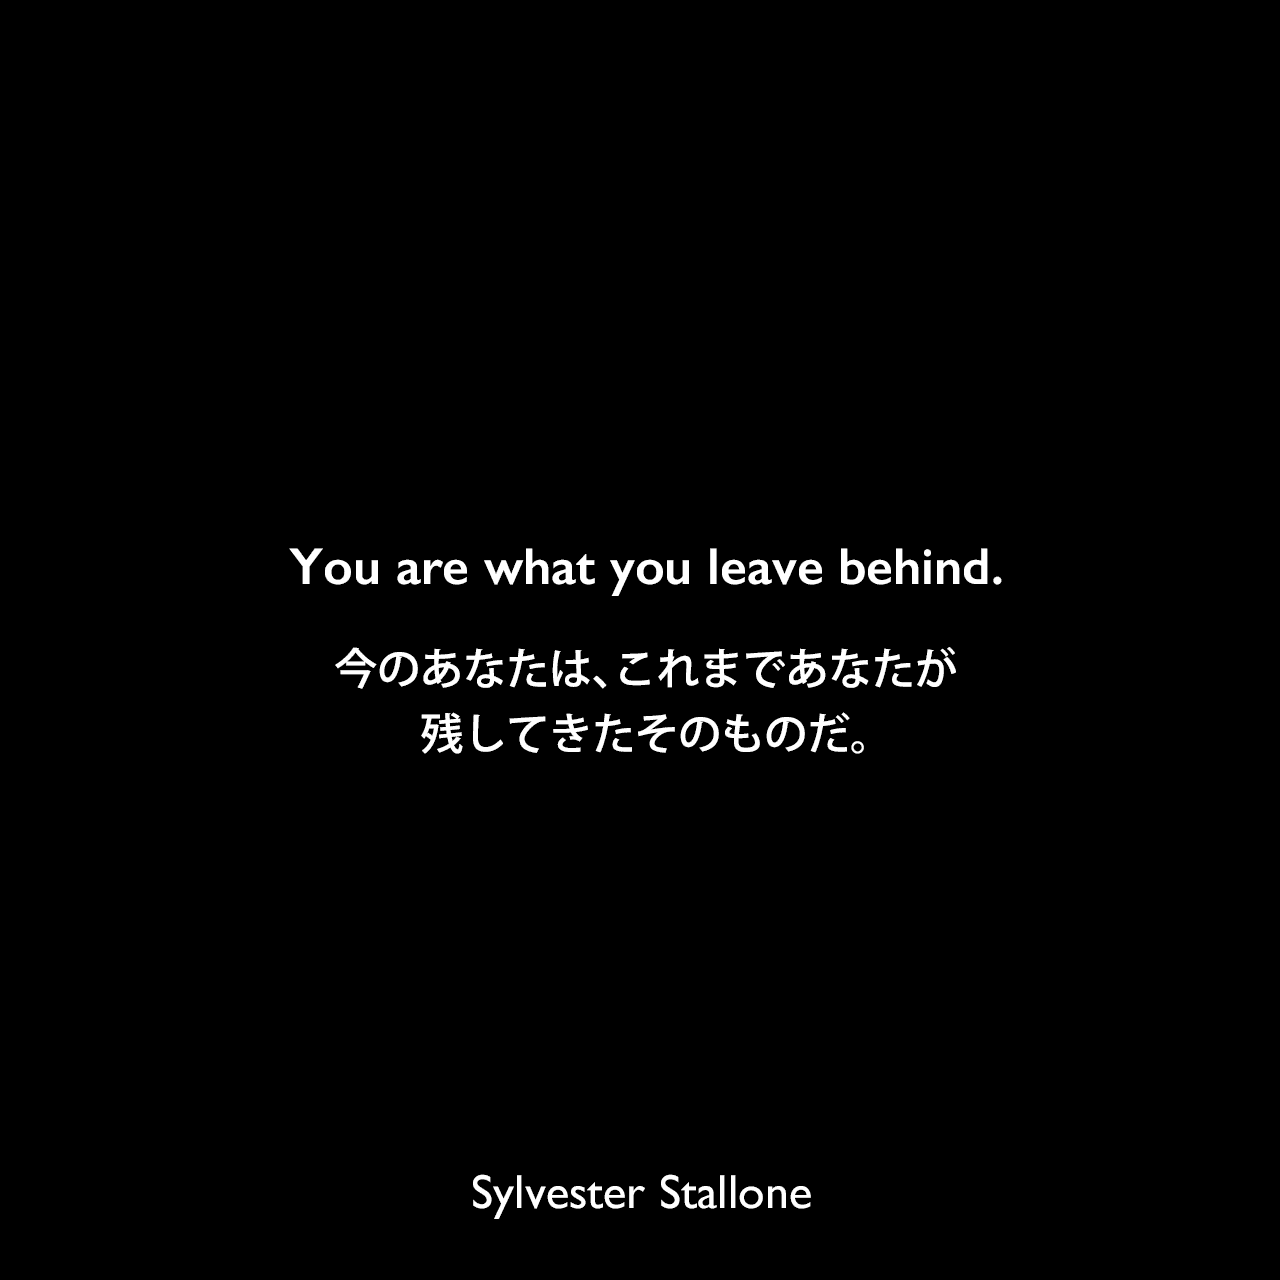 You are what you leave behind.今のあなたは、これまであなたが残してきたそのものだ。Sylvester Stallone